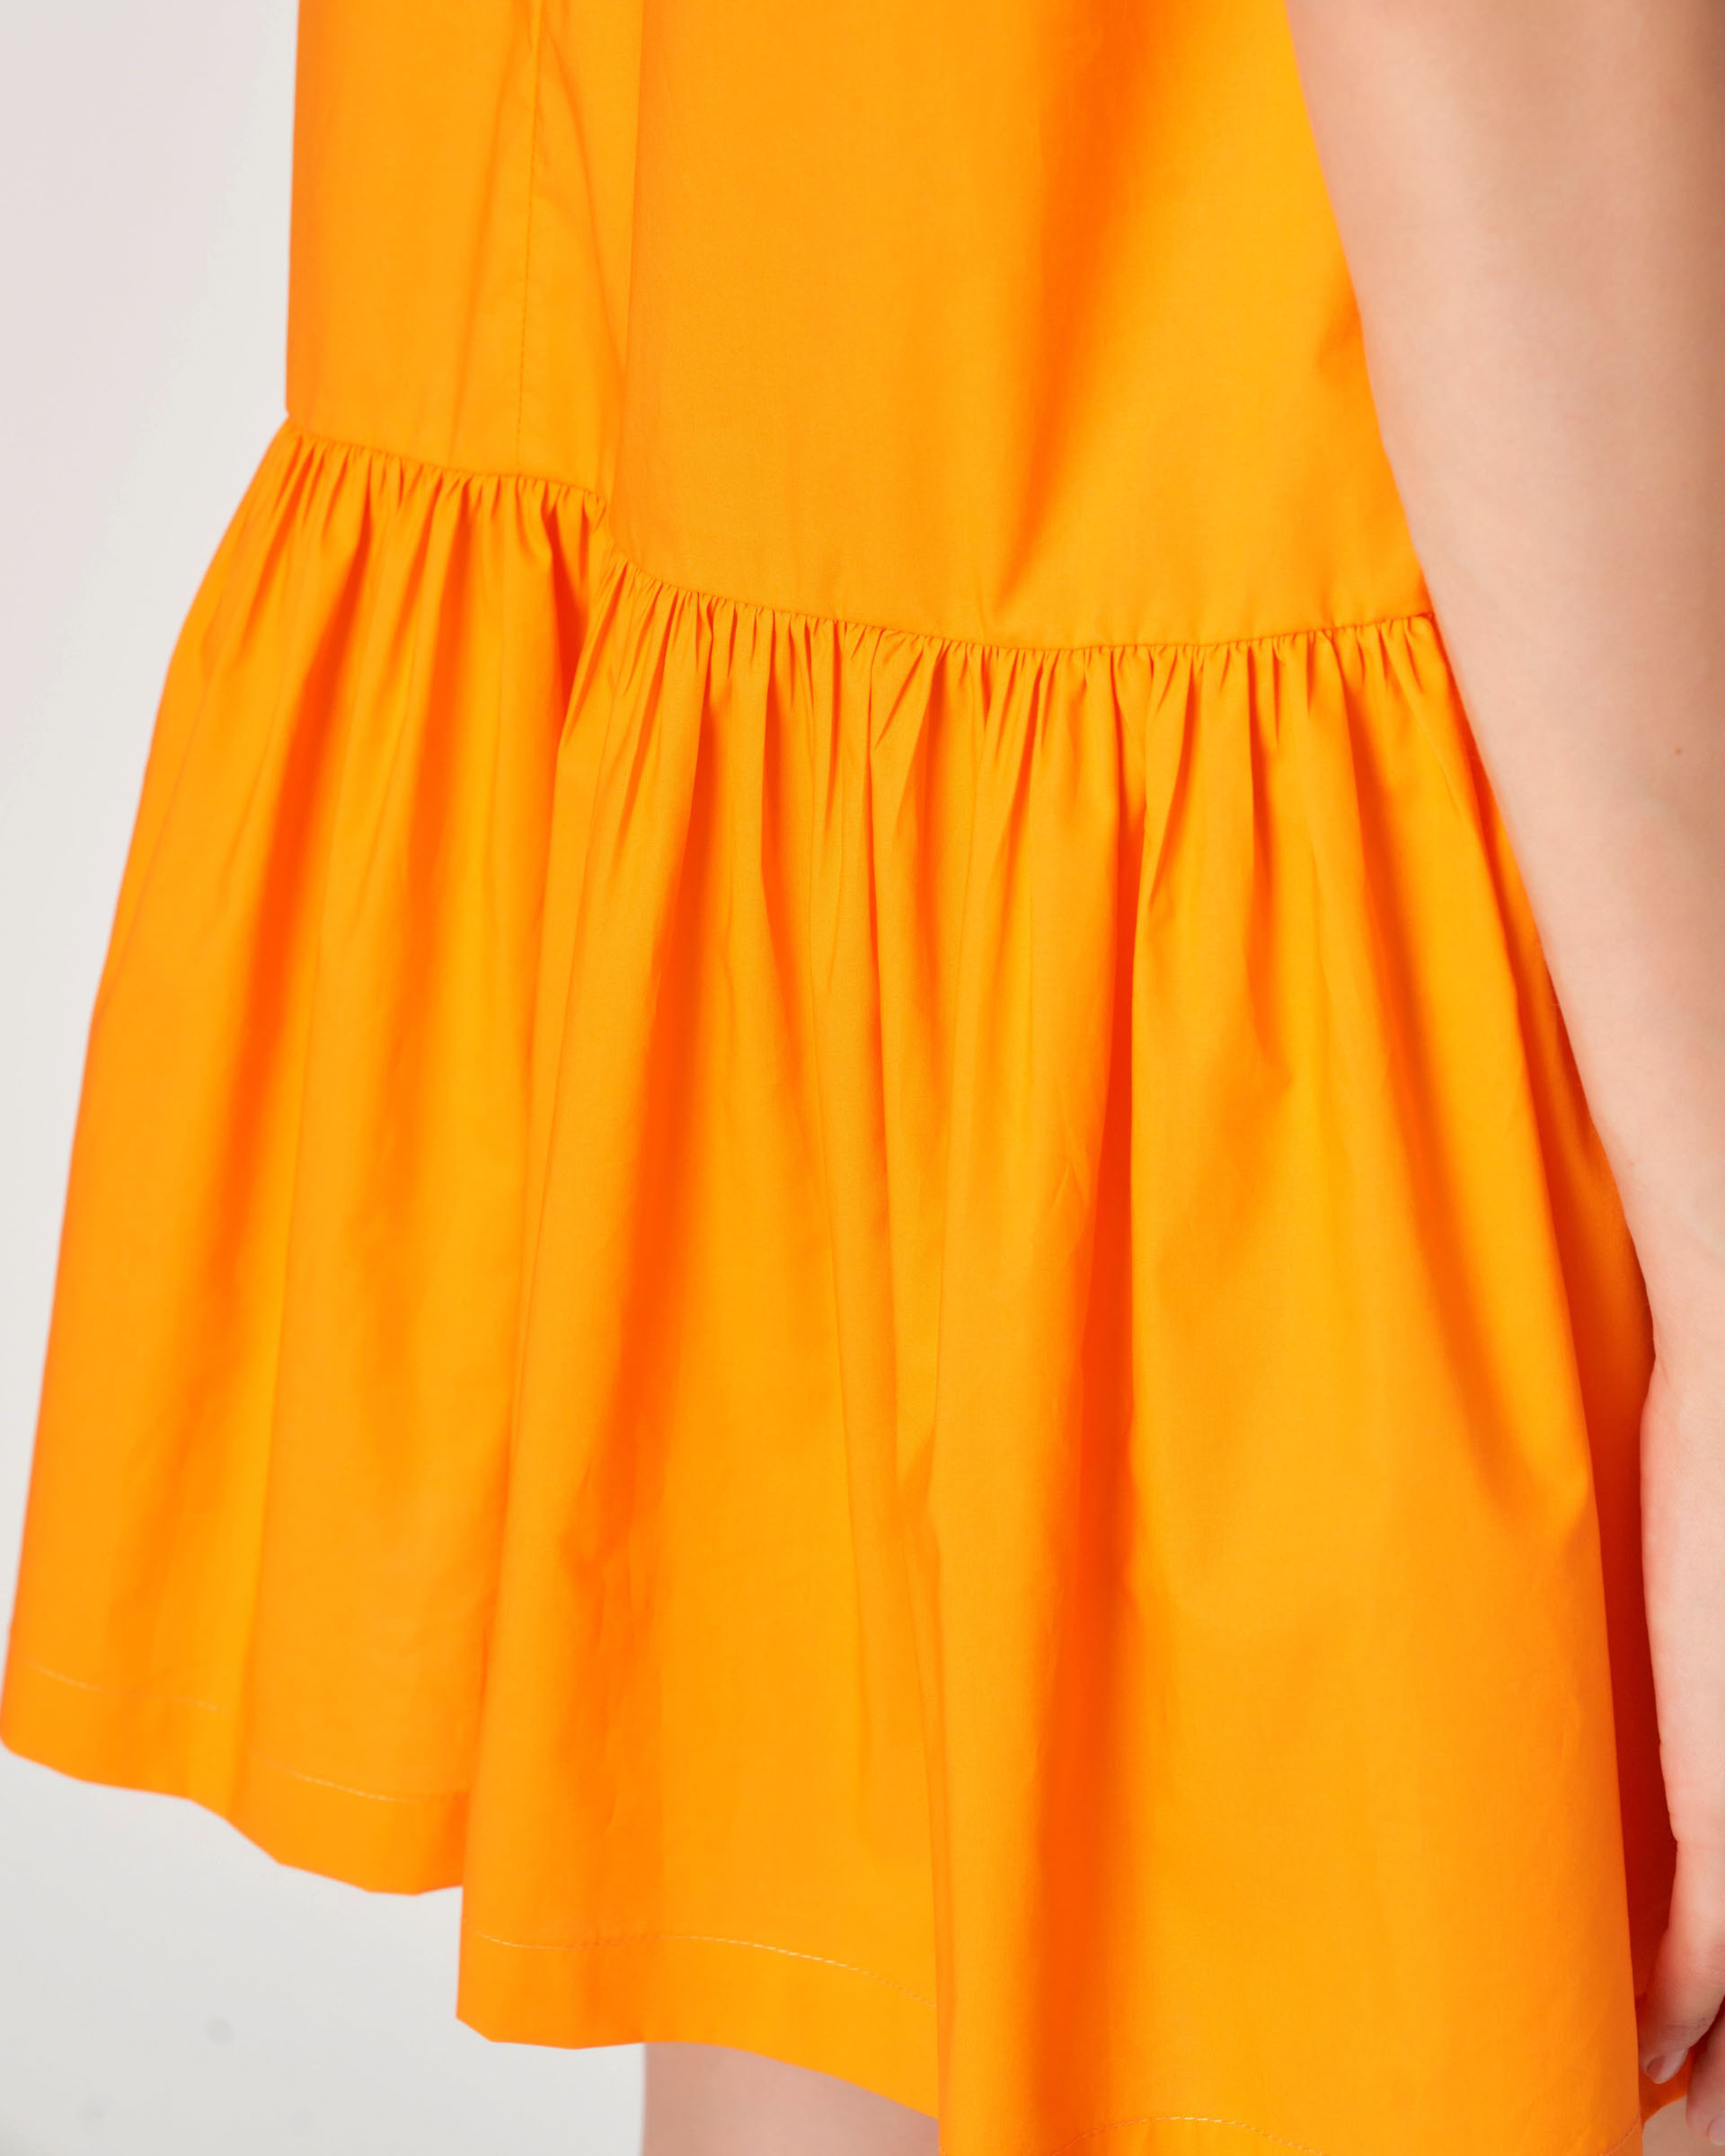 The Market Store | Dress With Bow